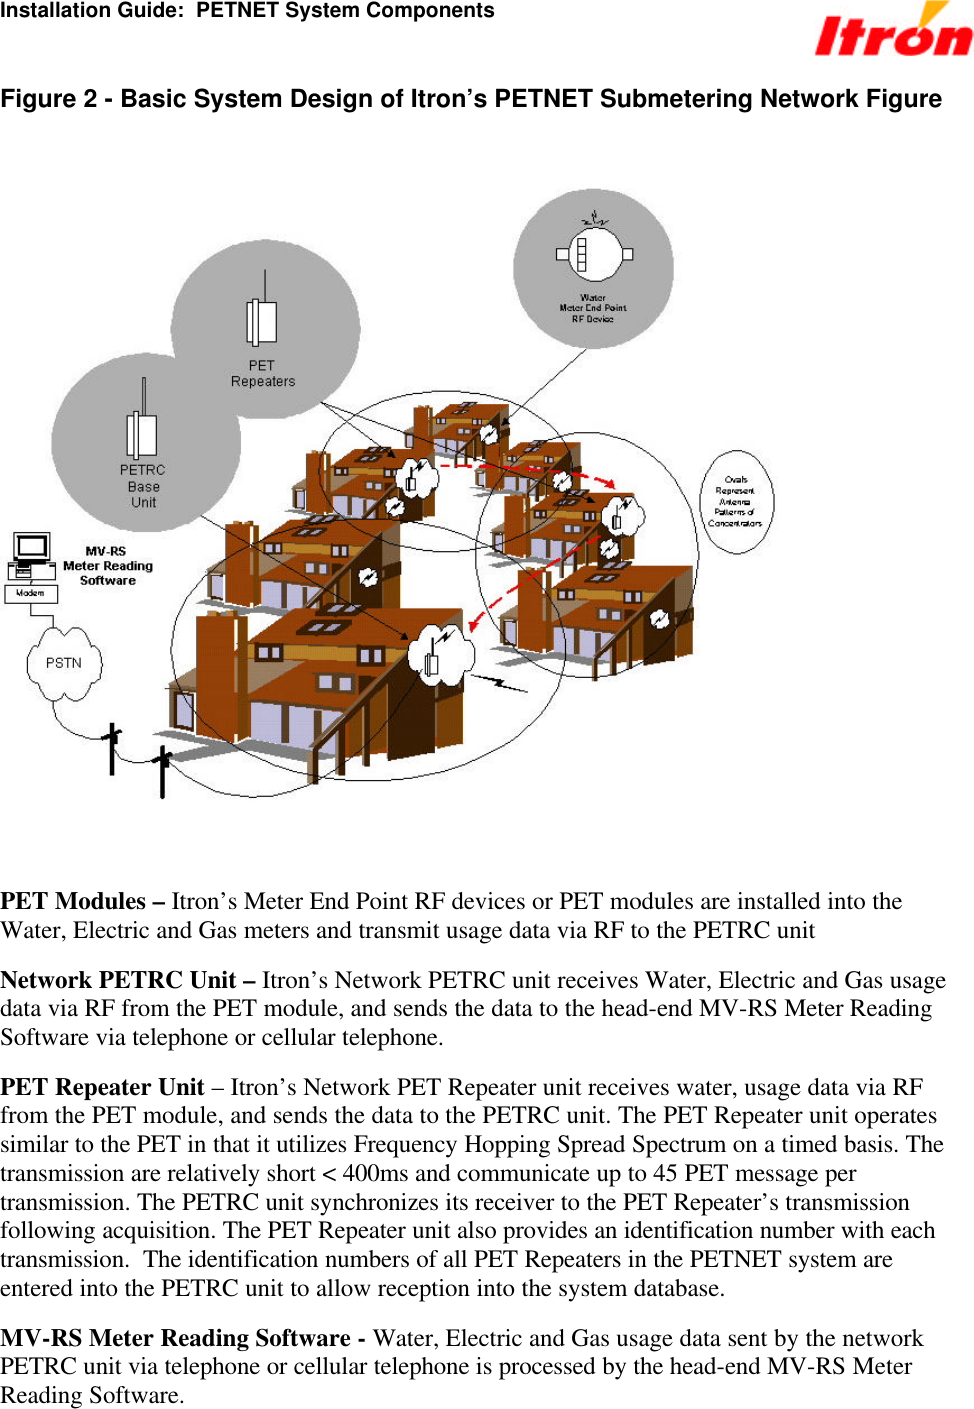 Installation Guide:  PETNET System Components Figure 2 - Basic System Design of Itron’s PETNET Submetering Network Figure     PET Modules – Itron’s Meter End Point RF devices or PET modules are installed into the Water, Electric and Gas meters and transmit usage data via RF to the PETRC unit Network PETRC Unit – Itron’s Network PETRC unit receives Water, Electric and Gas usage data via RF from the PET module, and sends the data to the head-end MV-RS Meter Reading Software via telephone or cellular telephone. PET Repeater Unit – Itron’s Network PET Repeater unit receives water, usage data via RF from the PET module, and sends the data to the PETRC unit. The PET Repeater unit operates similar to the PET in that it utilizes Frequency Hopping Spread Spectrum on a timed basis. The transmission are relatively short &lt; 400ms and communicate up to 45 PET message per transmission. The PETRC unit synchronizes its receiver to the PET Repeater’s transmission following acquisition. The PET Repeater unit also provides an identification number with each transmission.  The identification numbers of all PET Repeaters in the PETNET system are entered into the PETRC unit to allow reception into the system database. MV-RS Meter Reading Software - Water, Electric and Gas usage data sent by the network PETRC unit via telephone or cellular telephone is processed by the head-end MV-RS Meter Reading Software. 